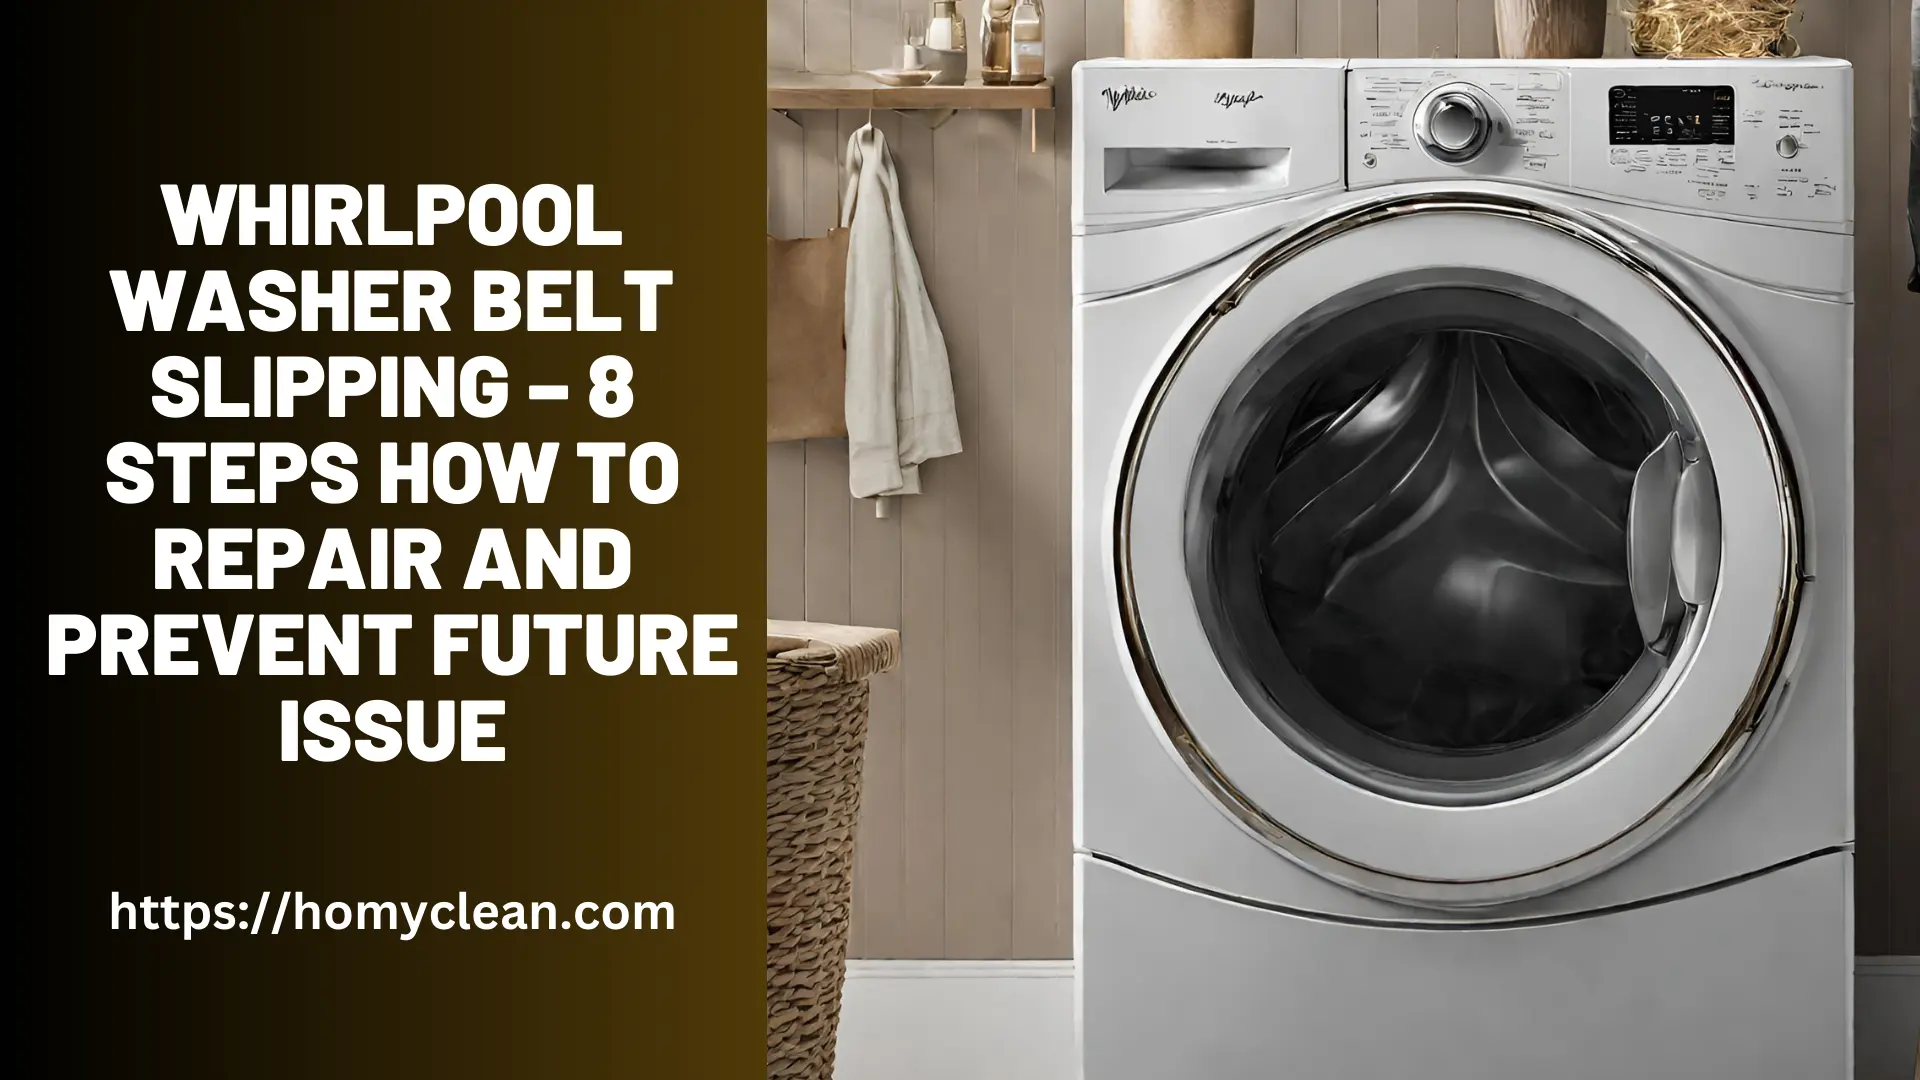 Whirlpool Washer Belt Slipping – 8 Steps How to Repair and Prevent Future Issue